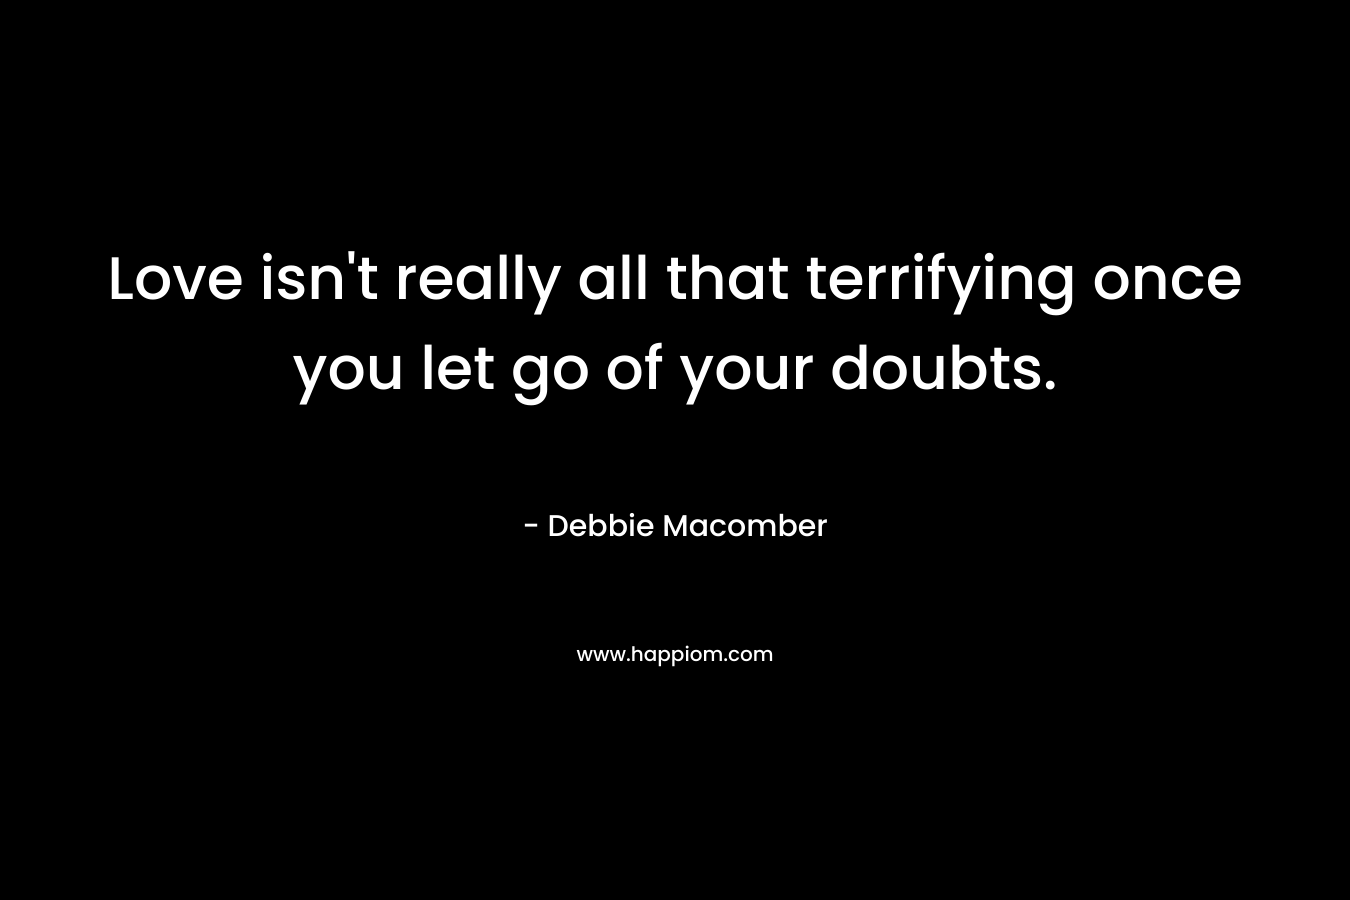 Love isn’t really all that terrifying once you let go of your doubts. – Debbie Macomber